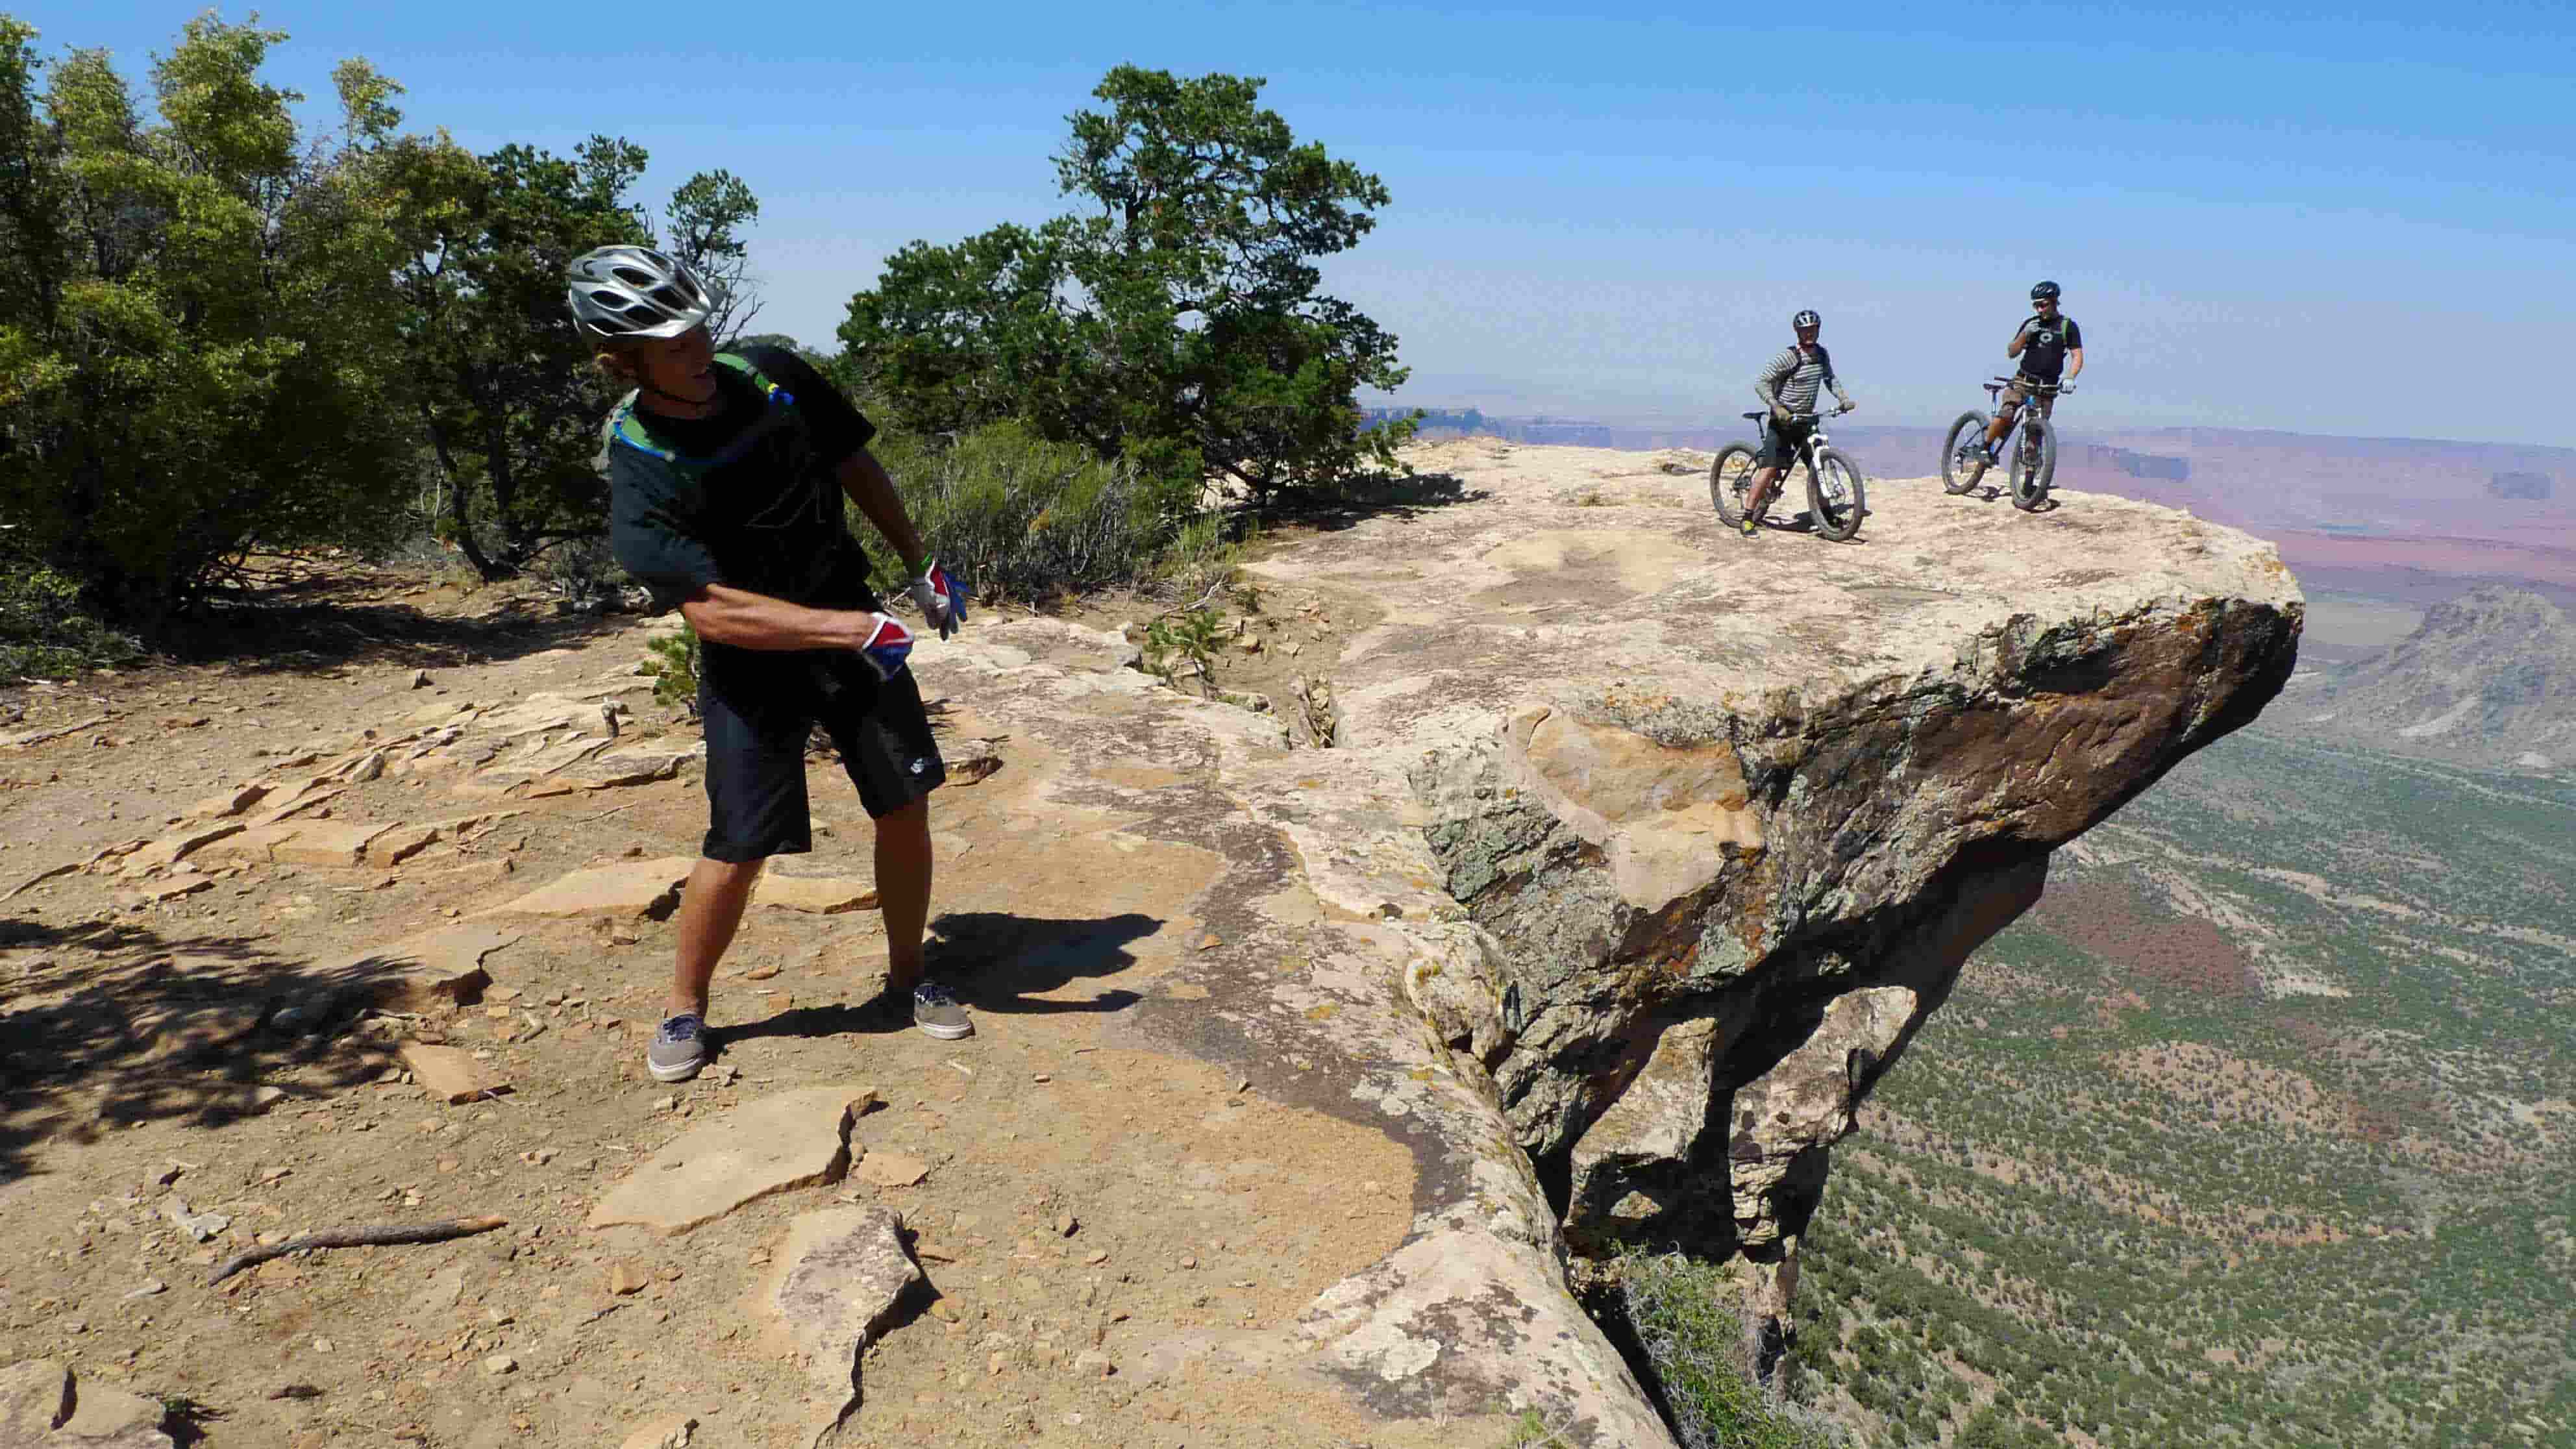 Front view of a cyclist standing near the edge of a high, rock cliff, with 2 cyclists and their Surly bike, behind them